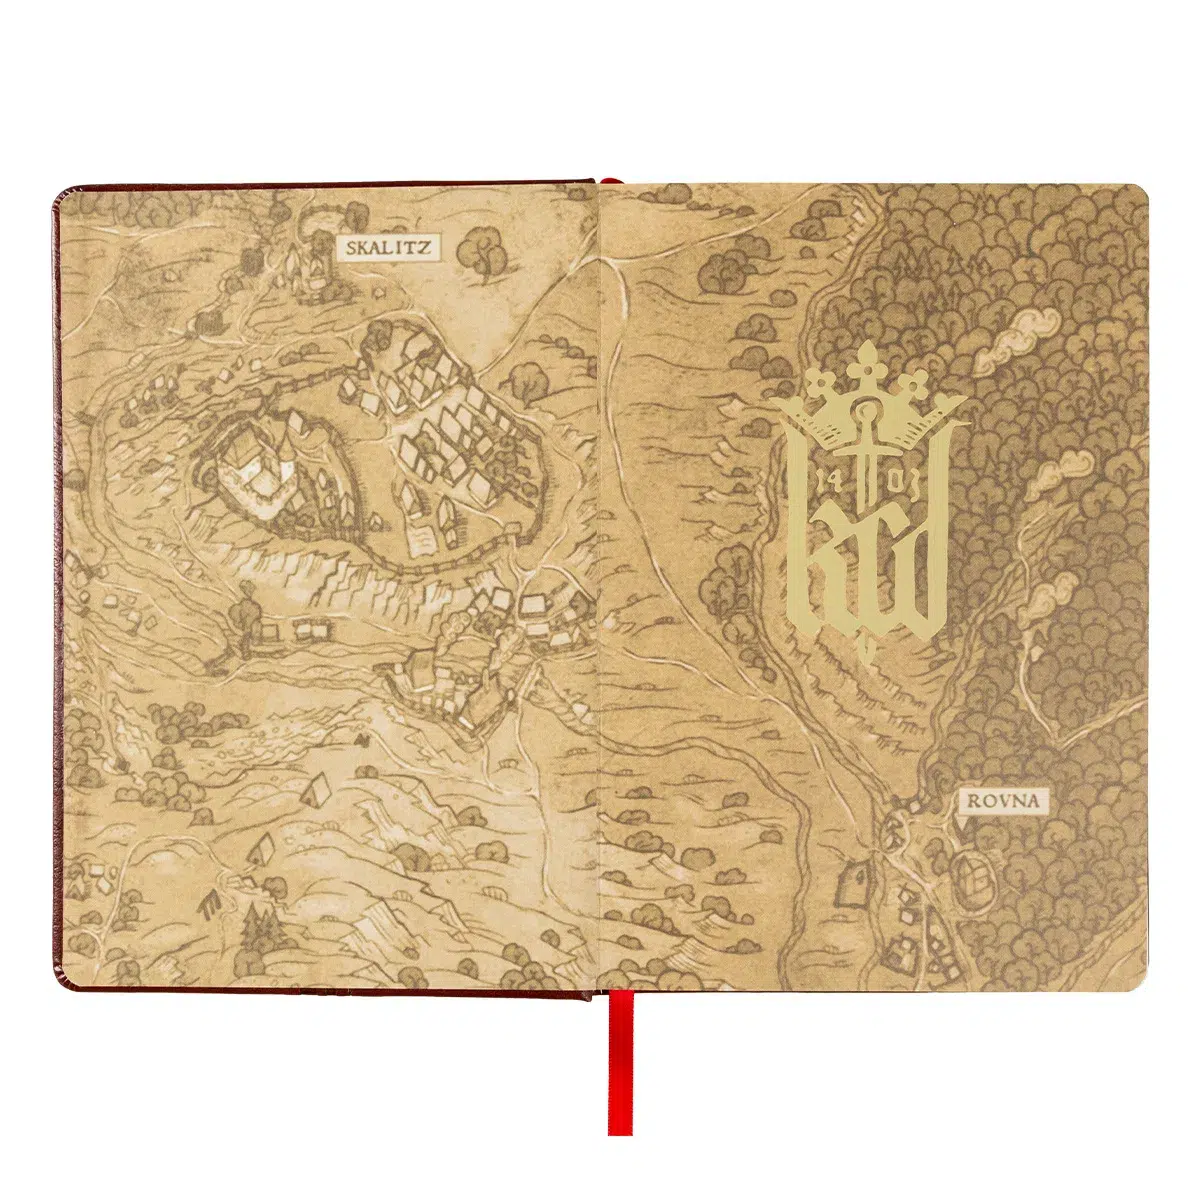 KCD Notebook "Sword" Image 5